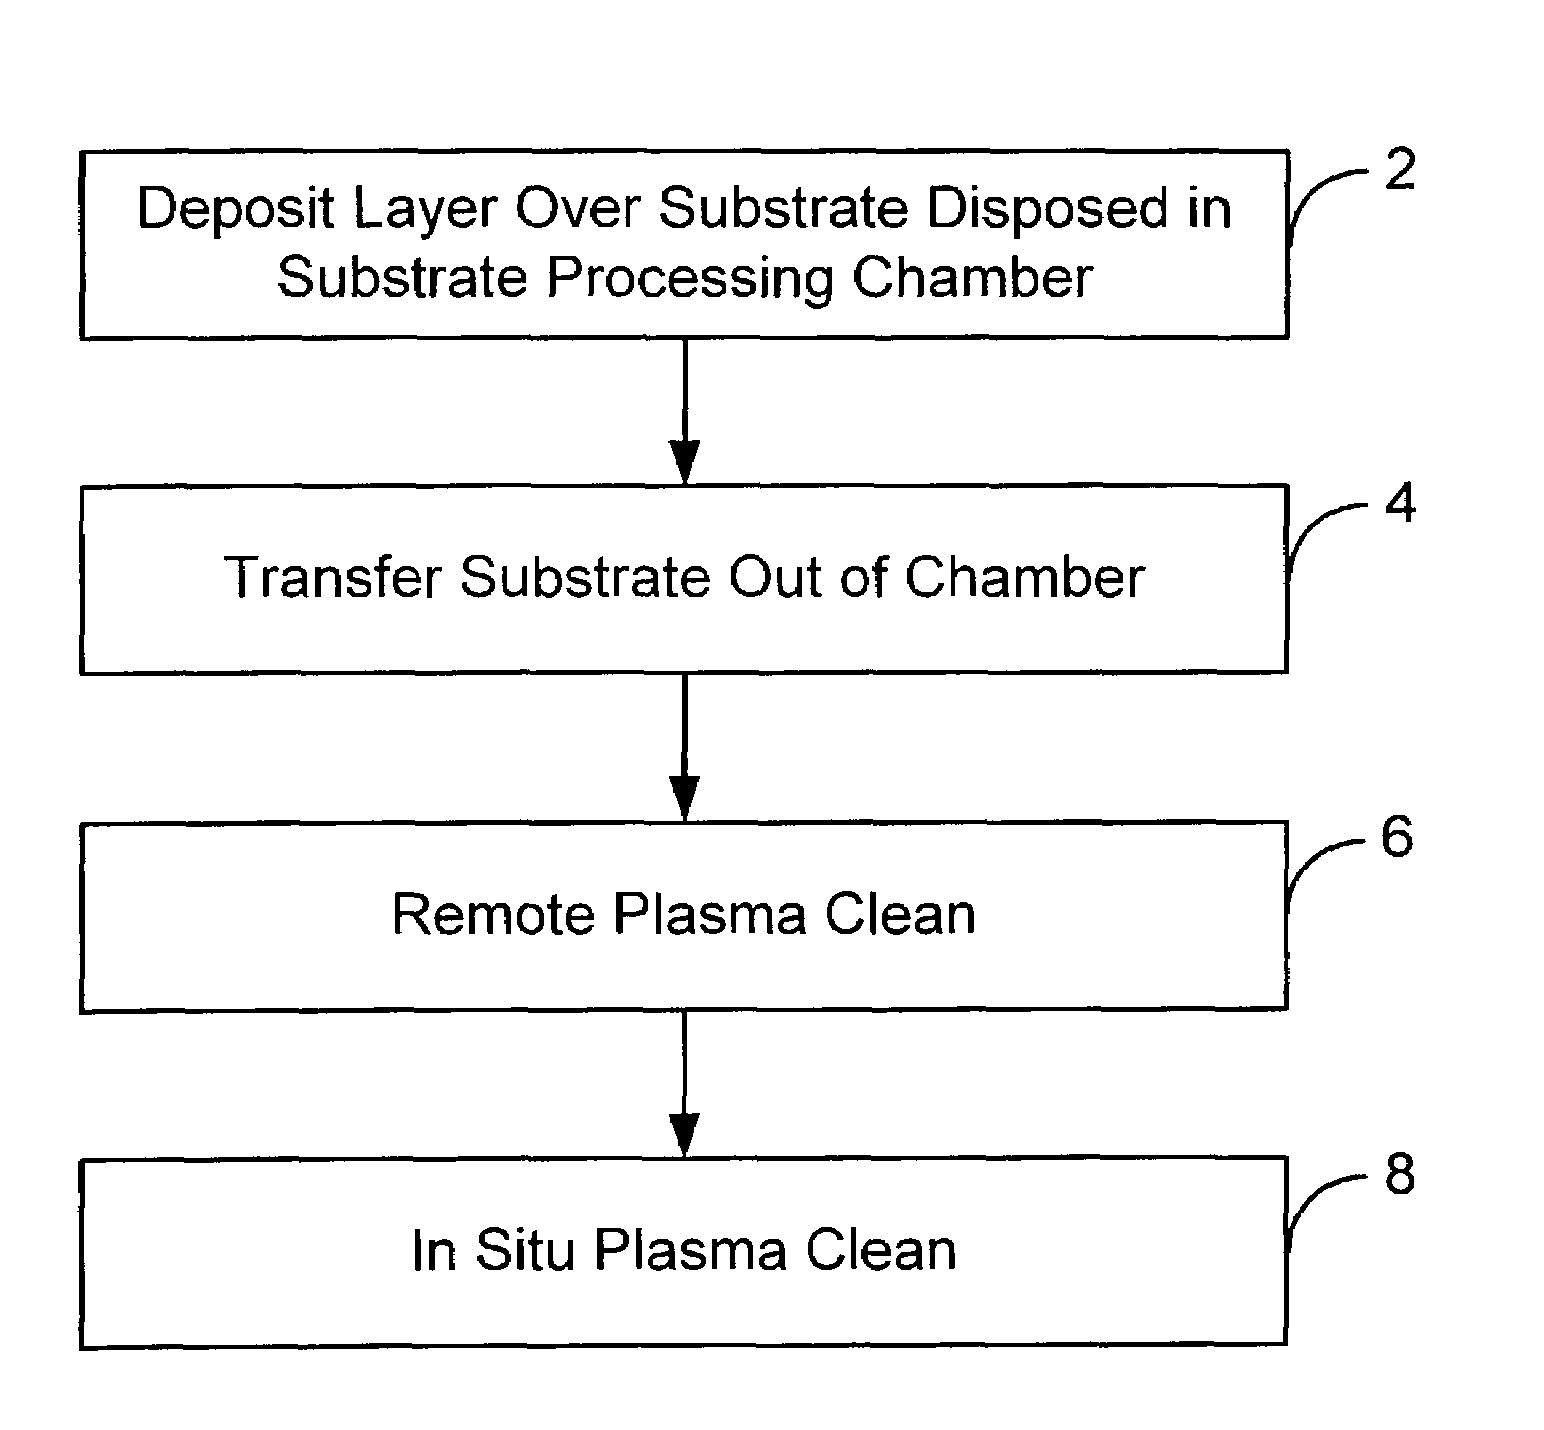 Chamber clean method using remote and in situ plasma cleaning systems